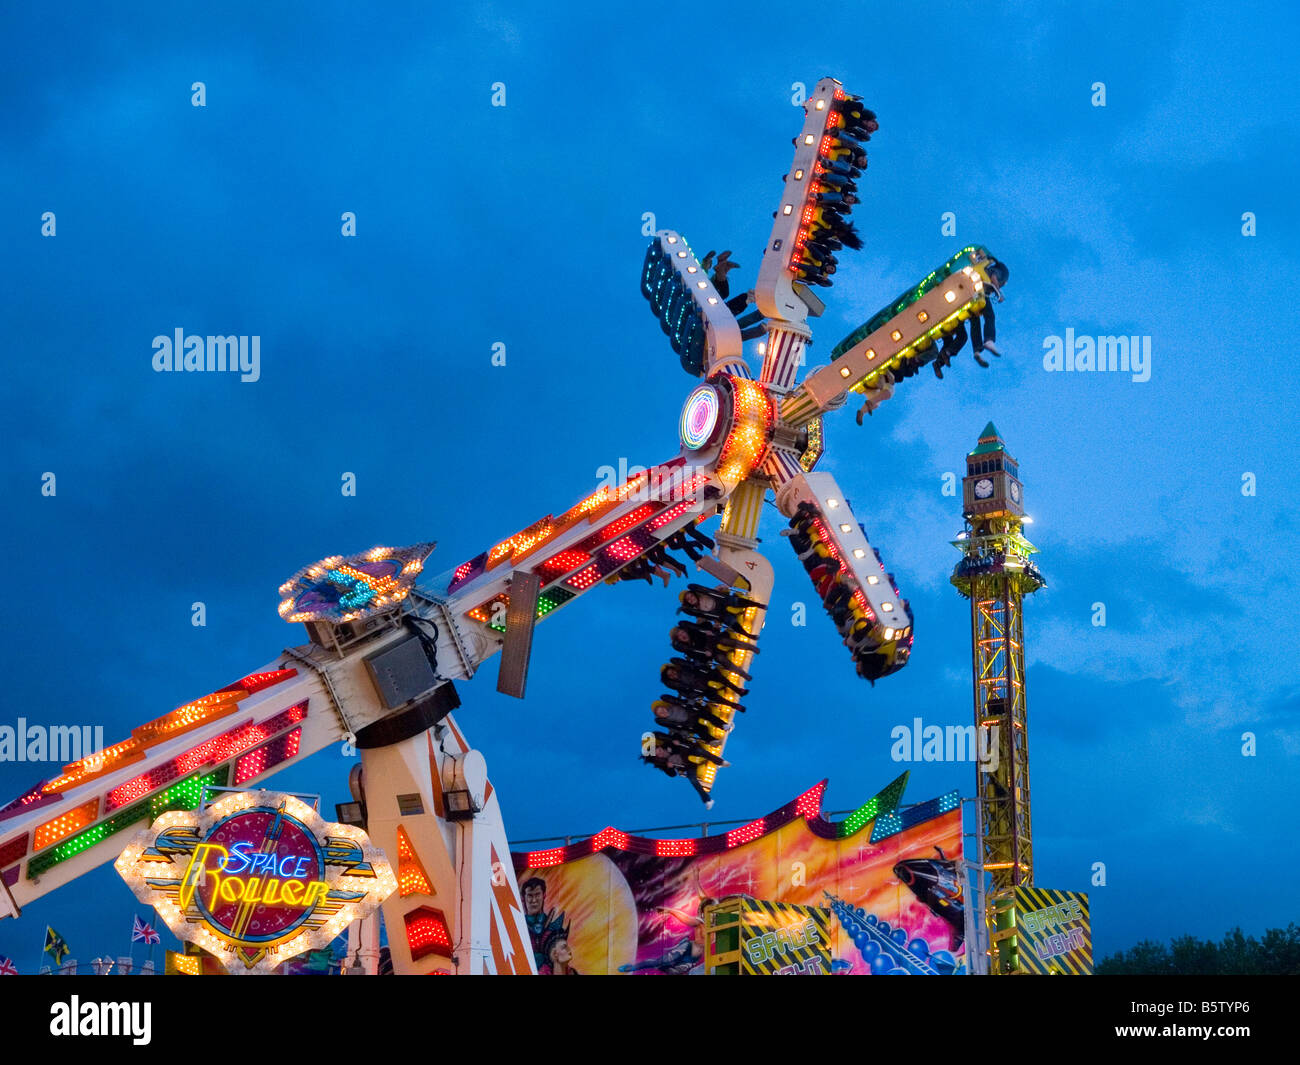 The Space Roller ride at the Goose Fair in Nottingham, Nottinghamshire  England UK Stock Photo - Alamy